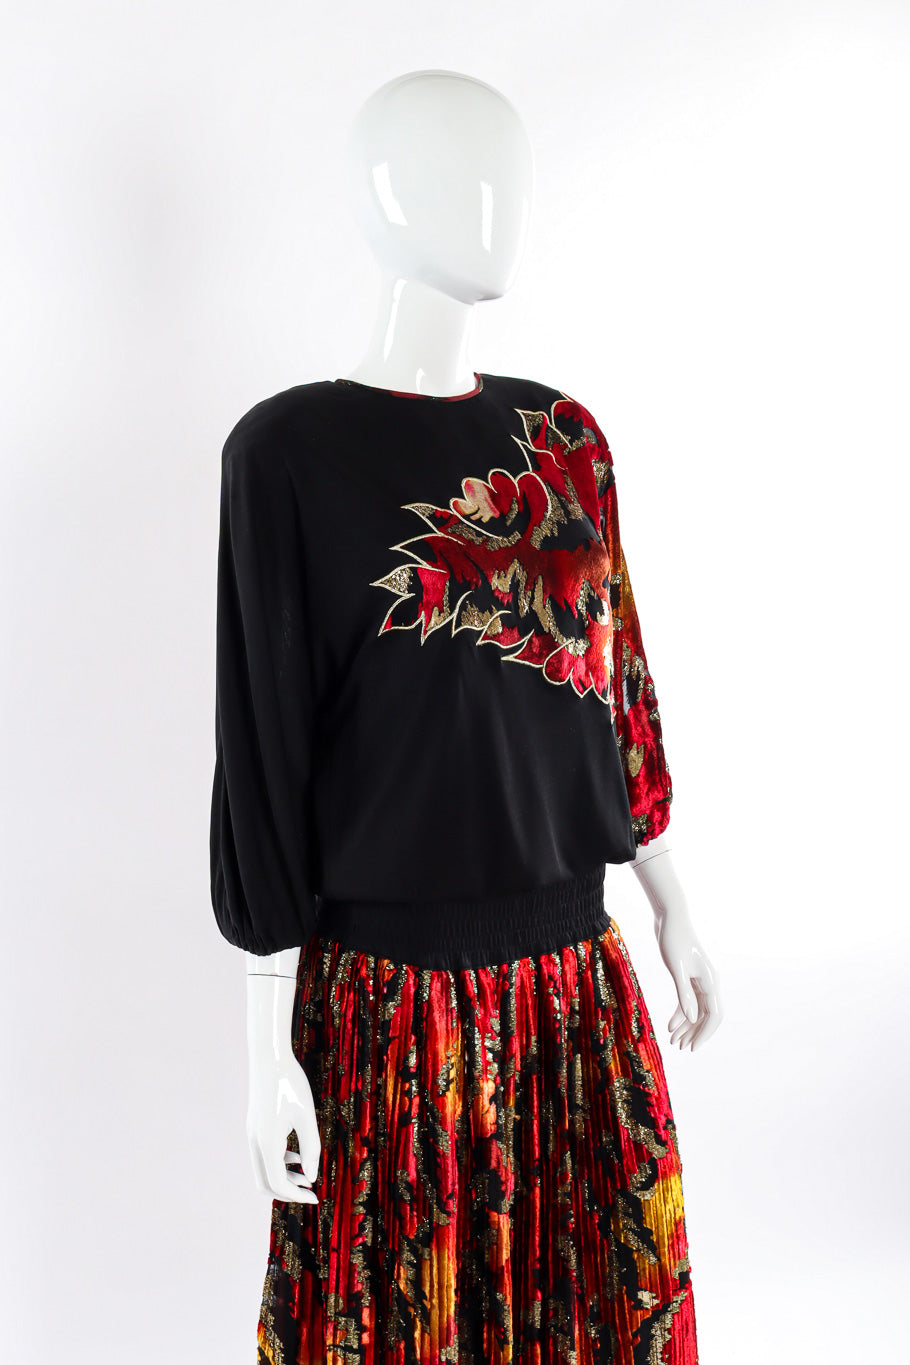 Multi-printed silk limited edition dress by Diane Freis mannequin 3/4 without scarf  @recessla